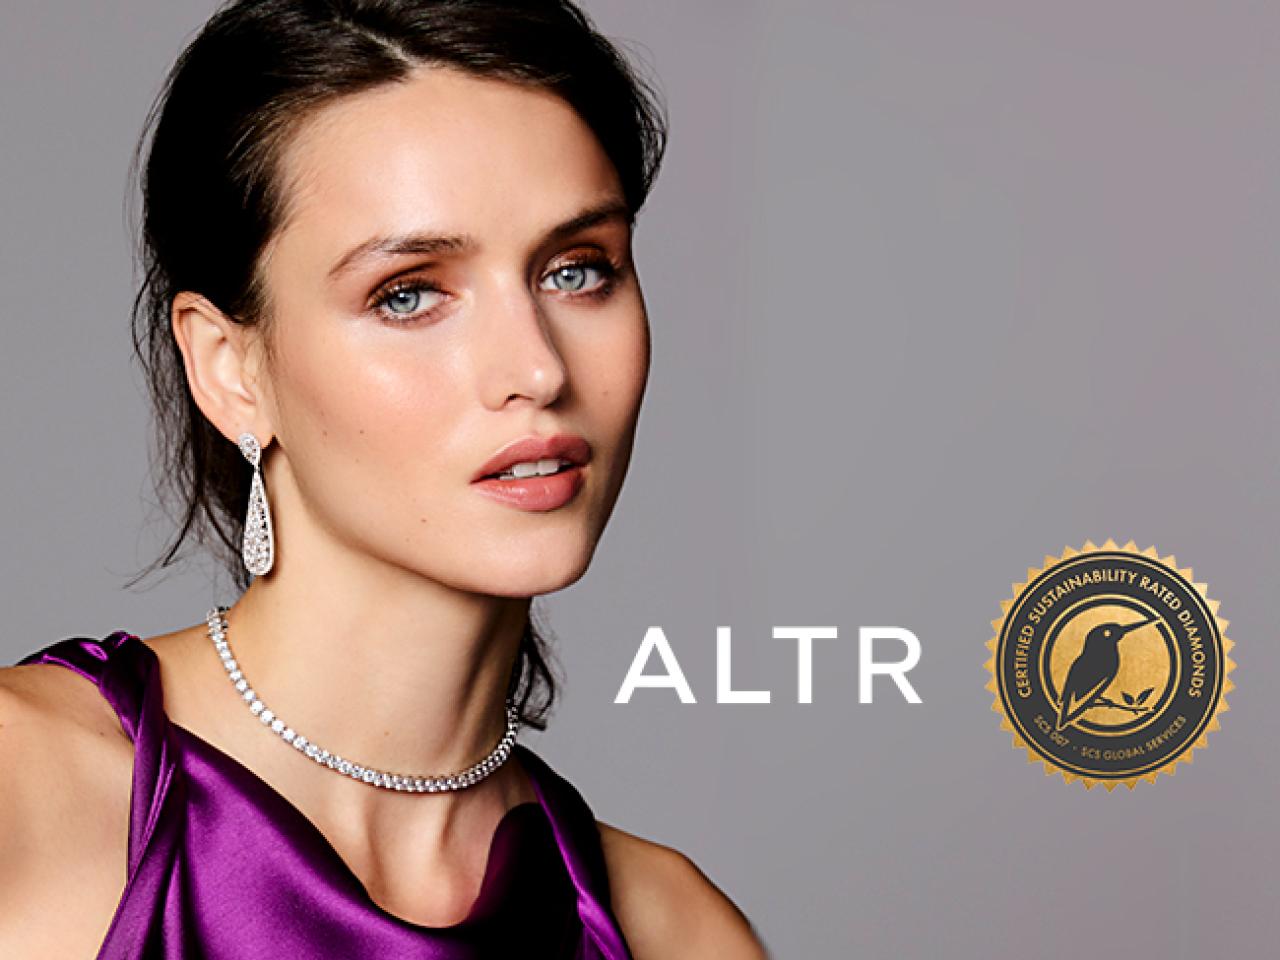 ALTR becomes World’s First SCS-007 Certified Lab Grown Diamond Producer with a Sustainability Rating Score of 100